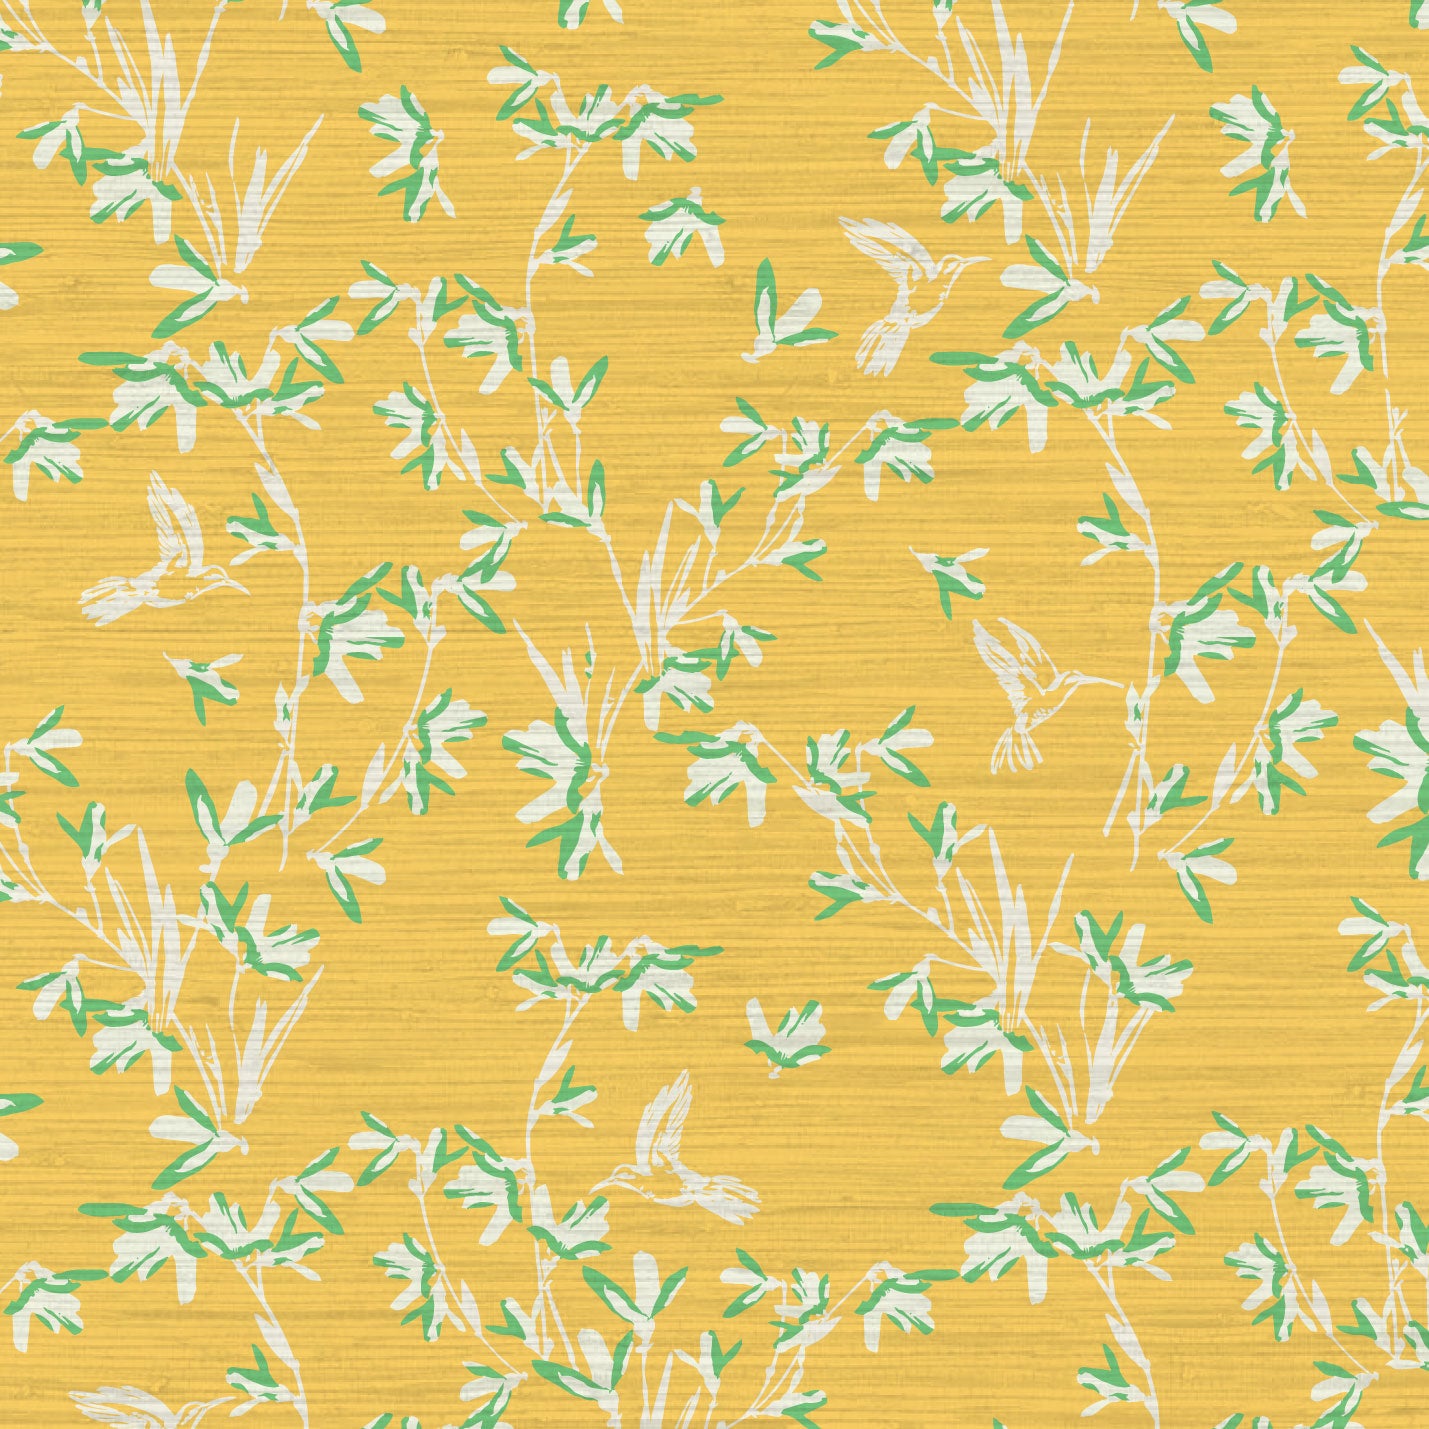 Load image into Gallery viewer, Chinoiserie Chinese Chinz Natural Textured Eco-Friendly Non-toxic High-quality  Sustainable practices Sustainability Wall covering Wallcovering Wallpaper Custom interior Bespoke Tailor-made grasscloth Nature inspired Bold Garden Wallpaper floral tree bird animal hummingbird garden tree asian inspired nursery feminine girl bedroom butter yellow bright yellow marigold yellow with white and light green
